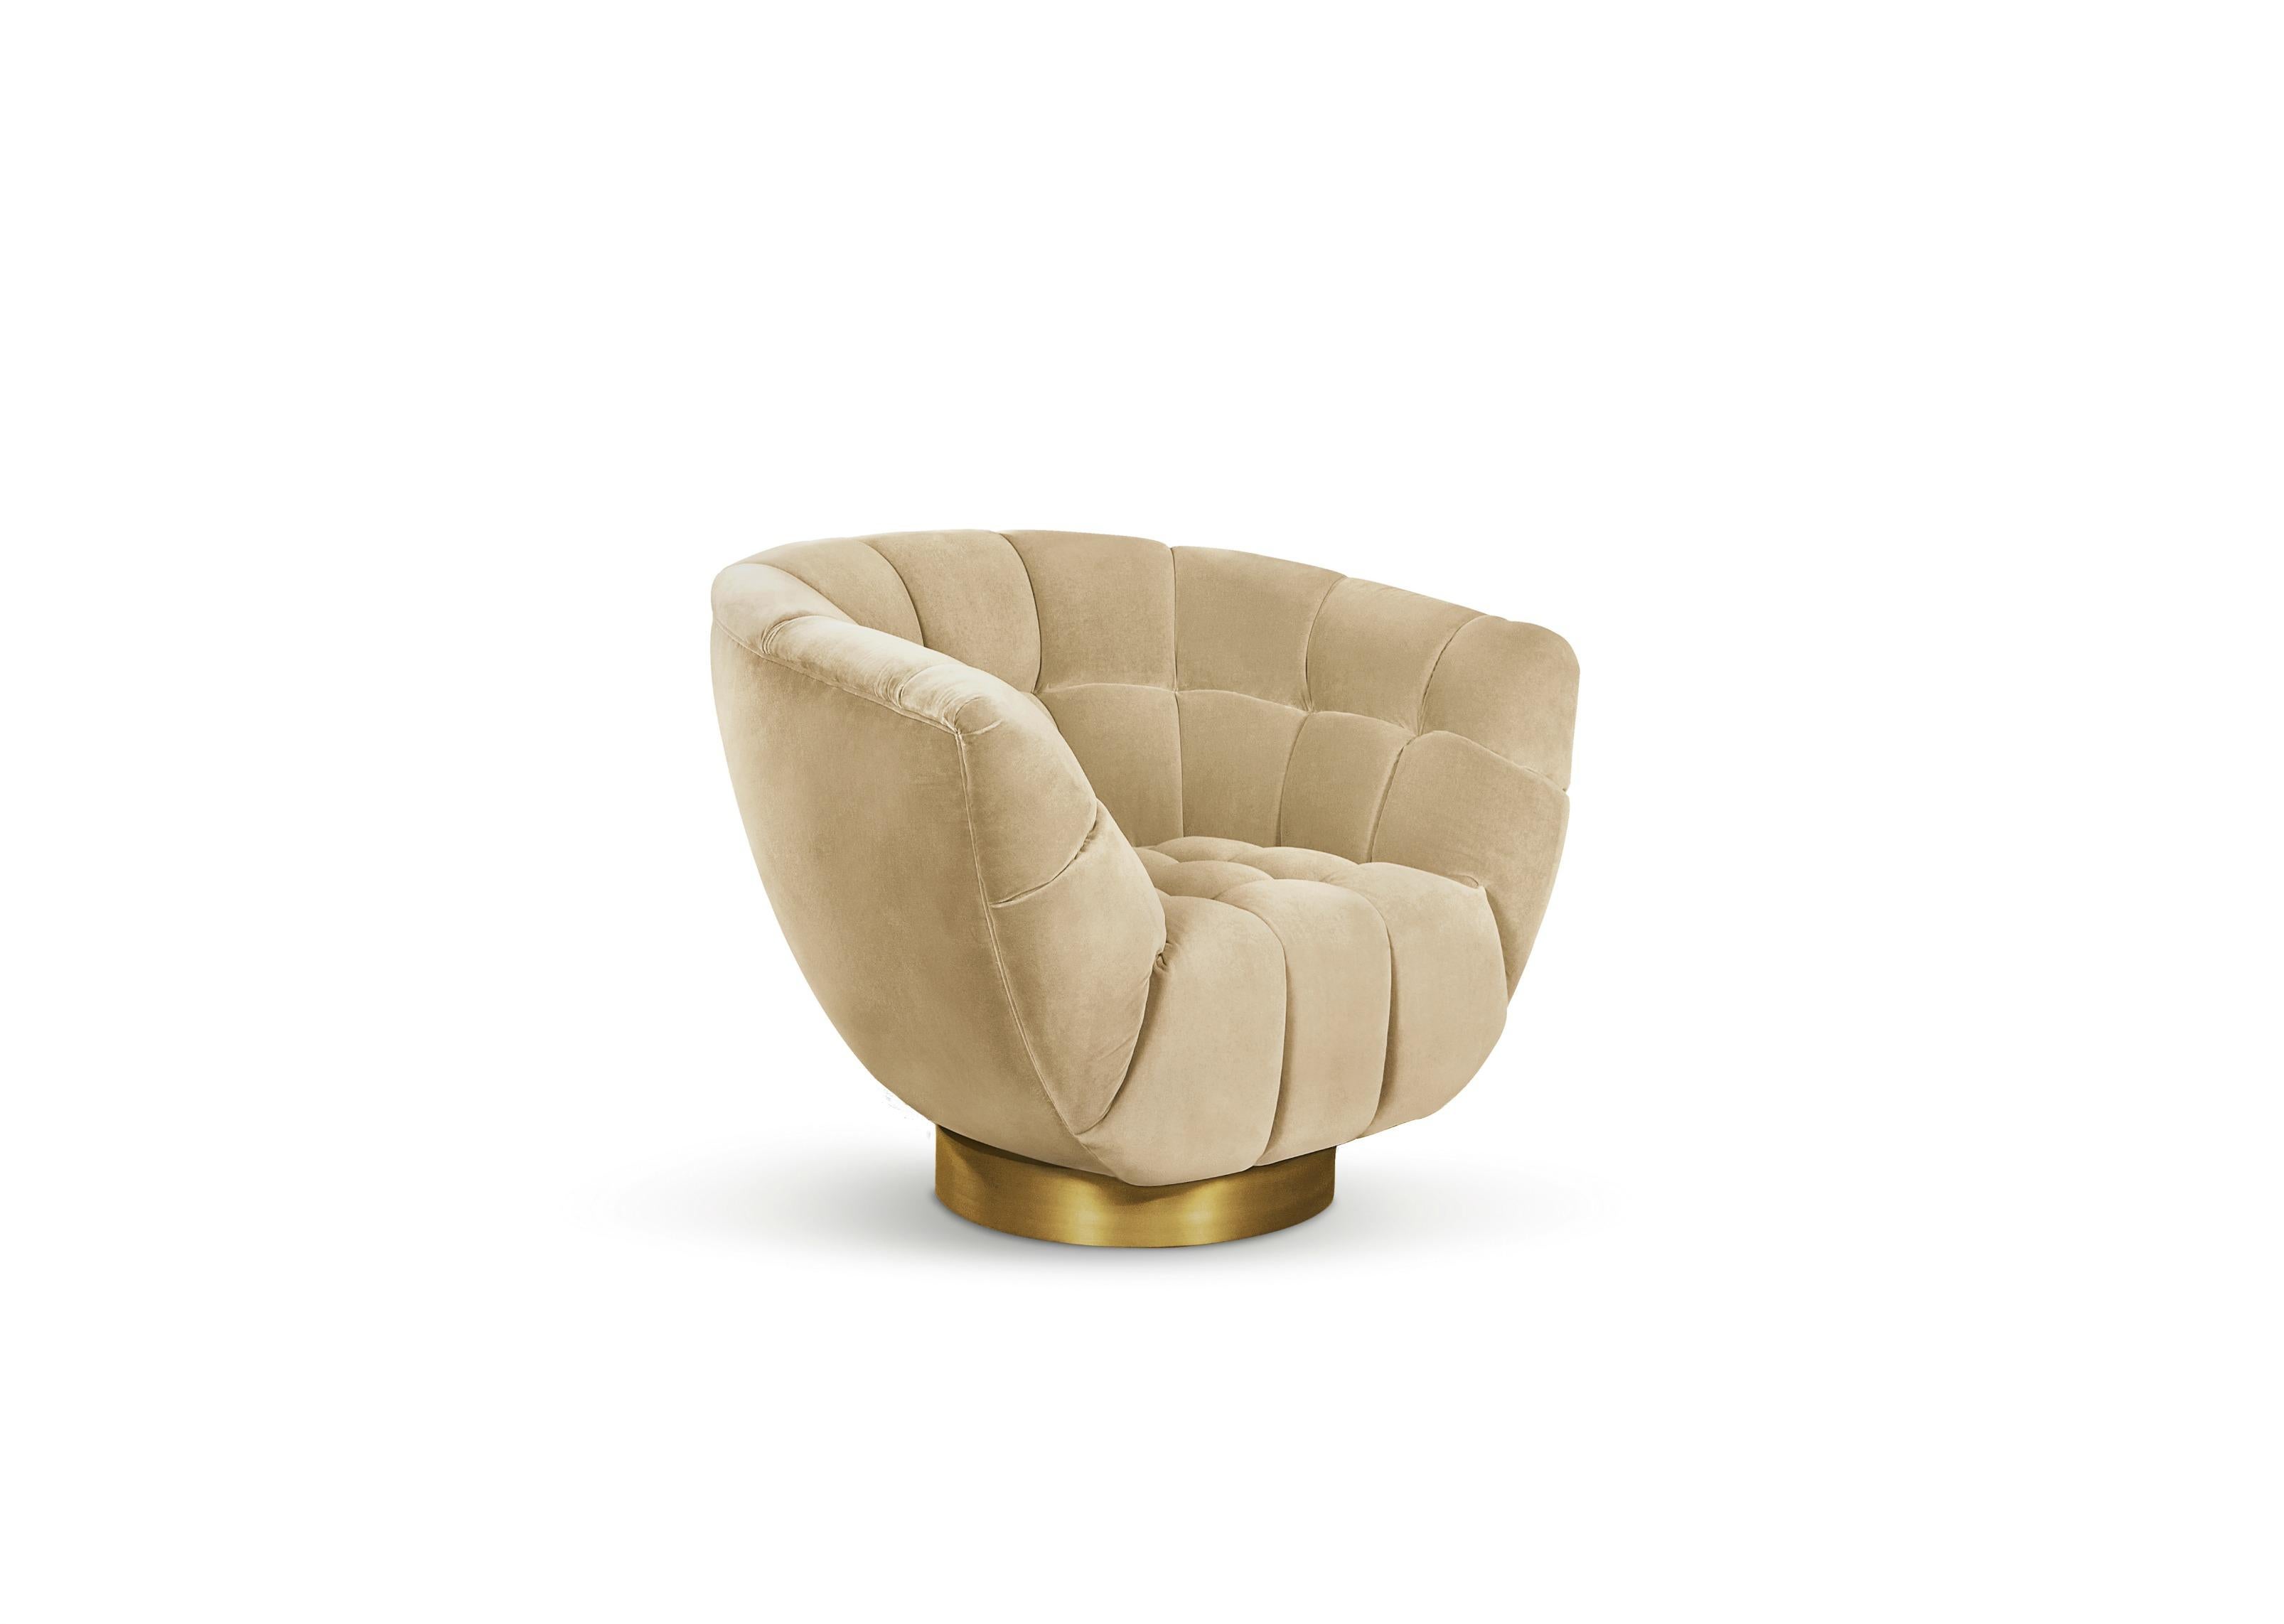 Modern Essex Swivel Armchair in Velvet by Brabbu

A Modern Swivel Armchair, Essex is a seating piece in Velvet fabric designed by Brabbu, that was inspired in the Metamorphosis - the transformation process from caterpillar to butterfly. Essex is a